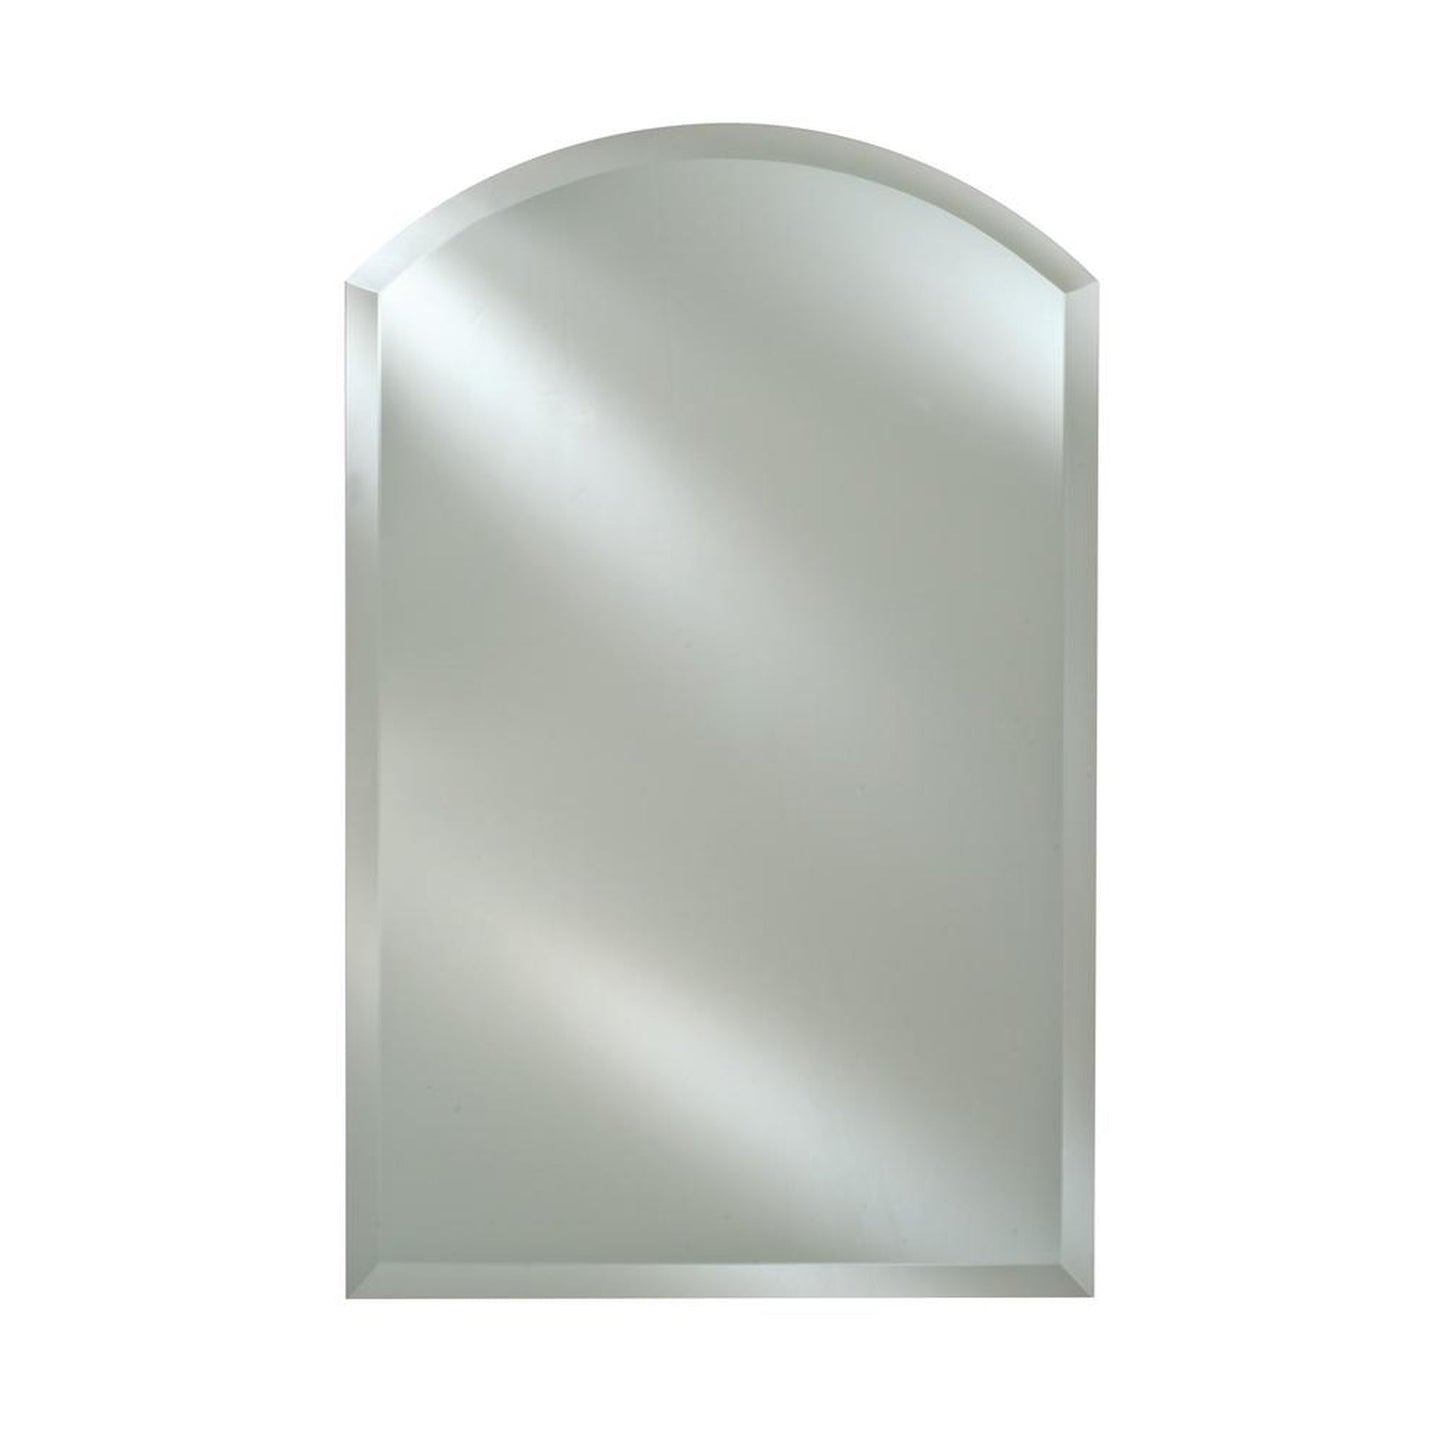 Afina Arch Top 20" x 30" Recessed Left Hinged Single Door Medicine Cabinet With Beveled Edge Mirror